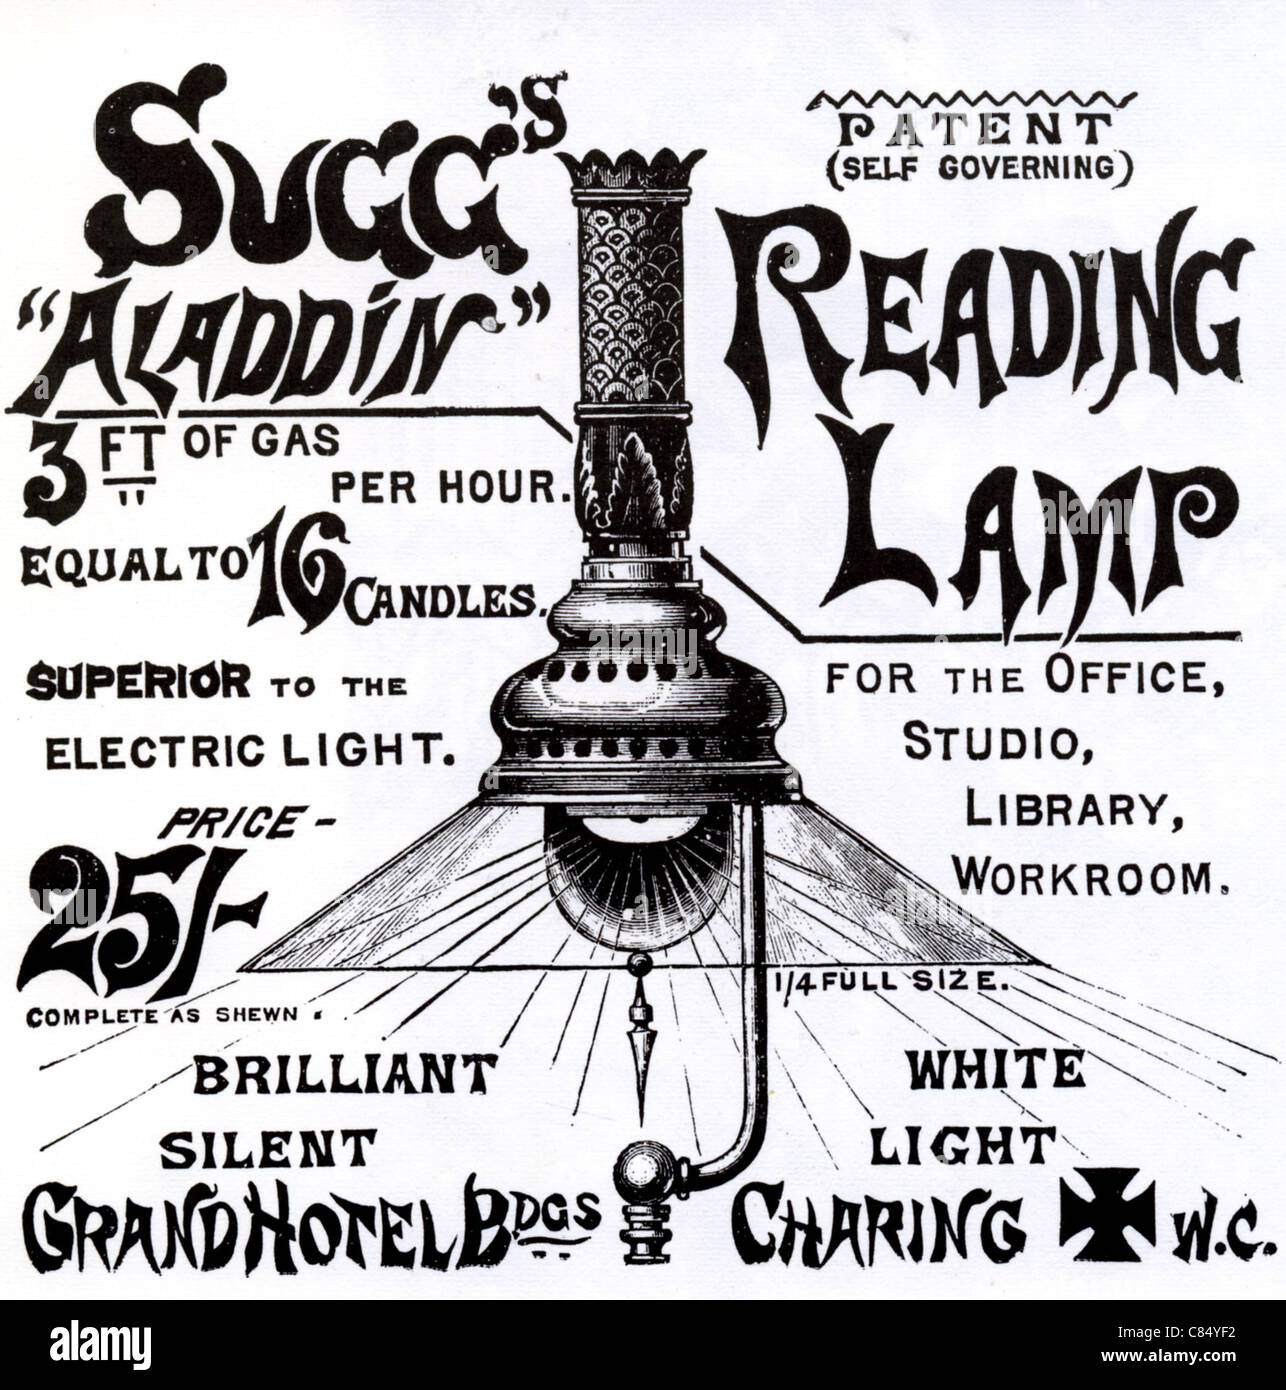 GAS READING LAMP  An 1887 advert for the Sugg's Aladdin lamp Stock Photo